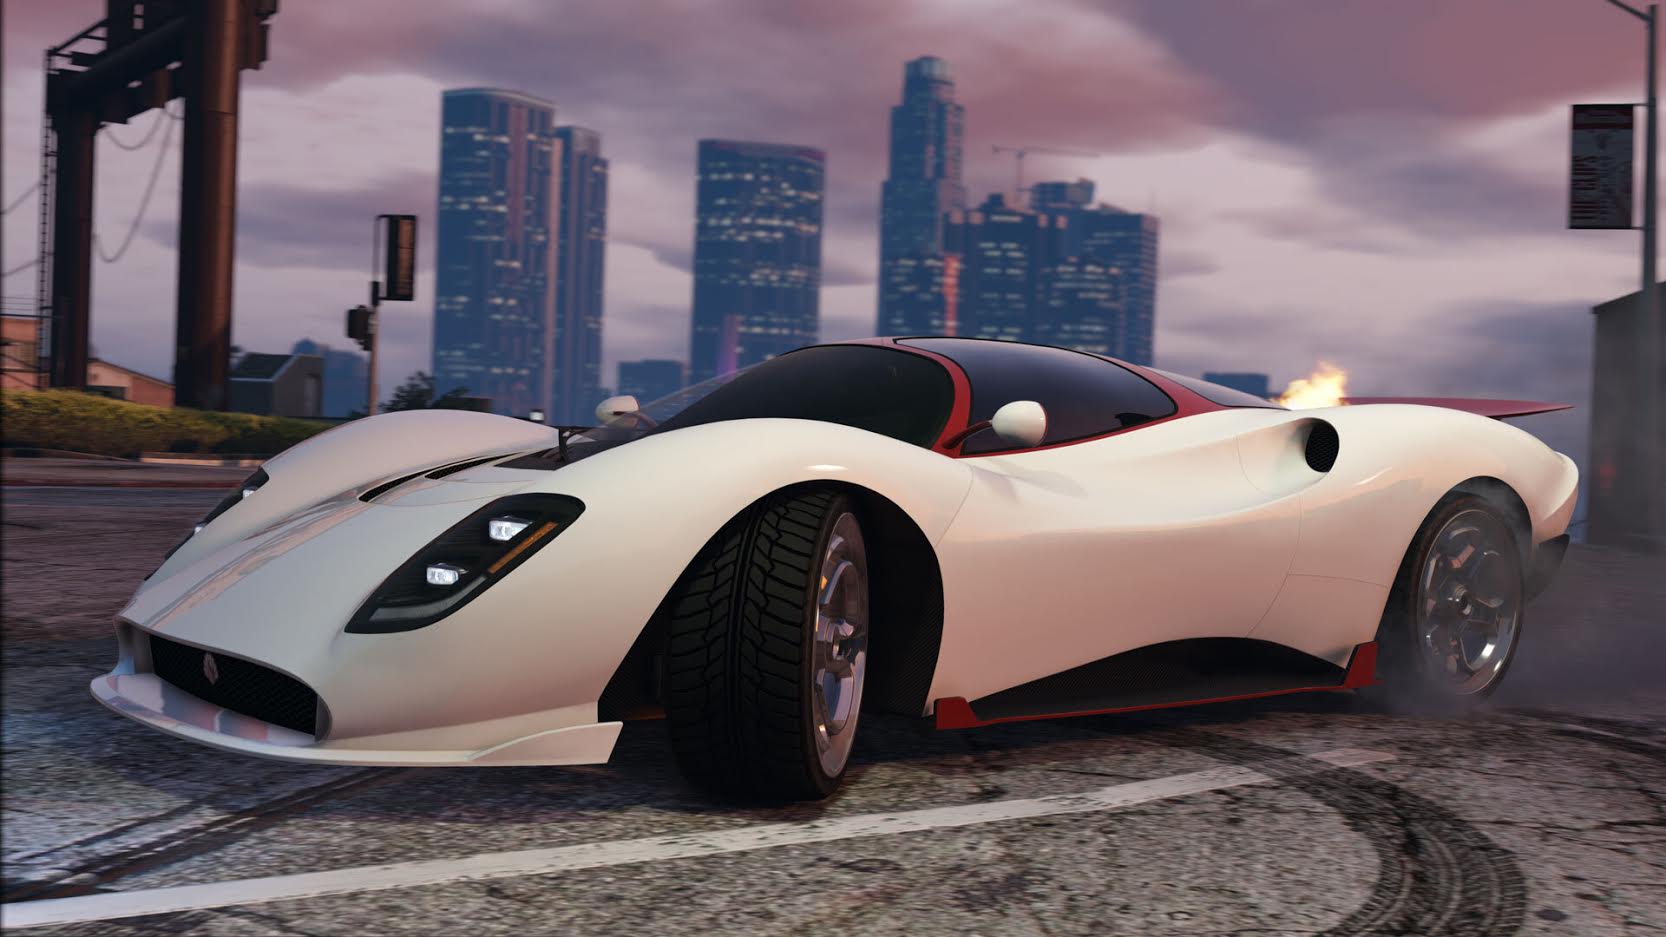 Image for This might be the most oddly satisfying GTA Online car stunt on the internet